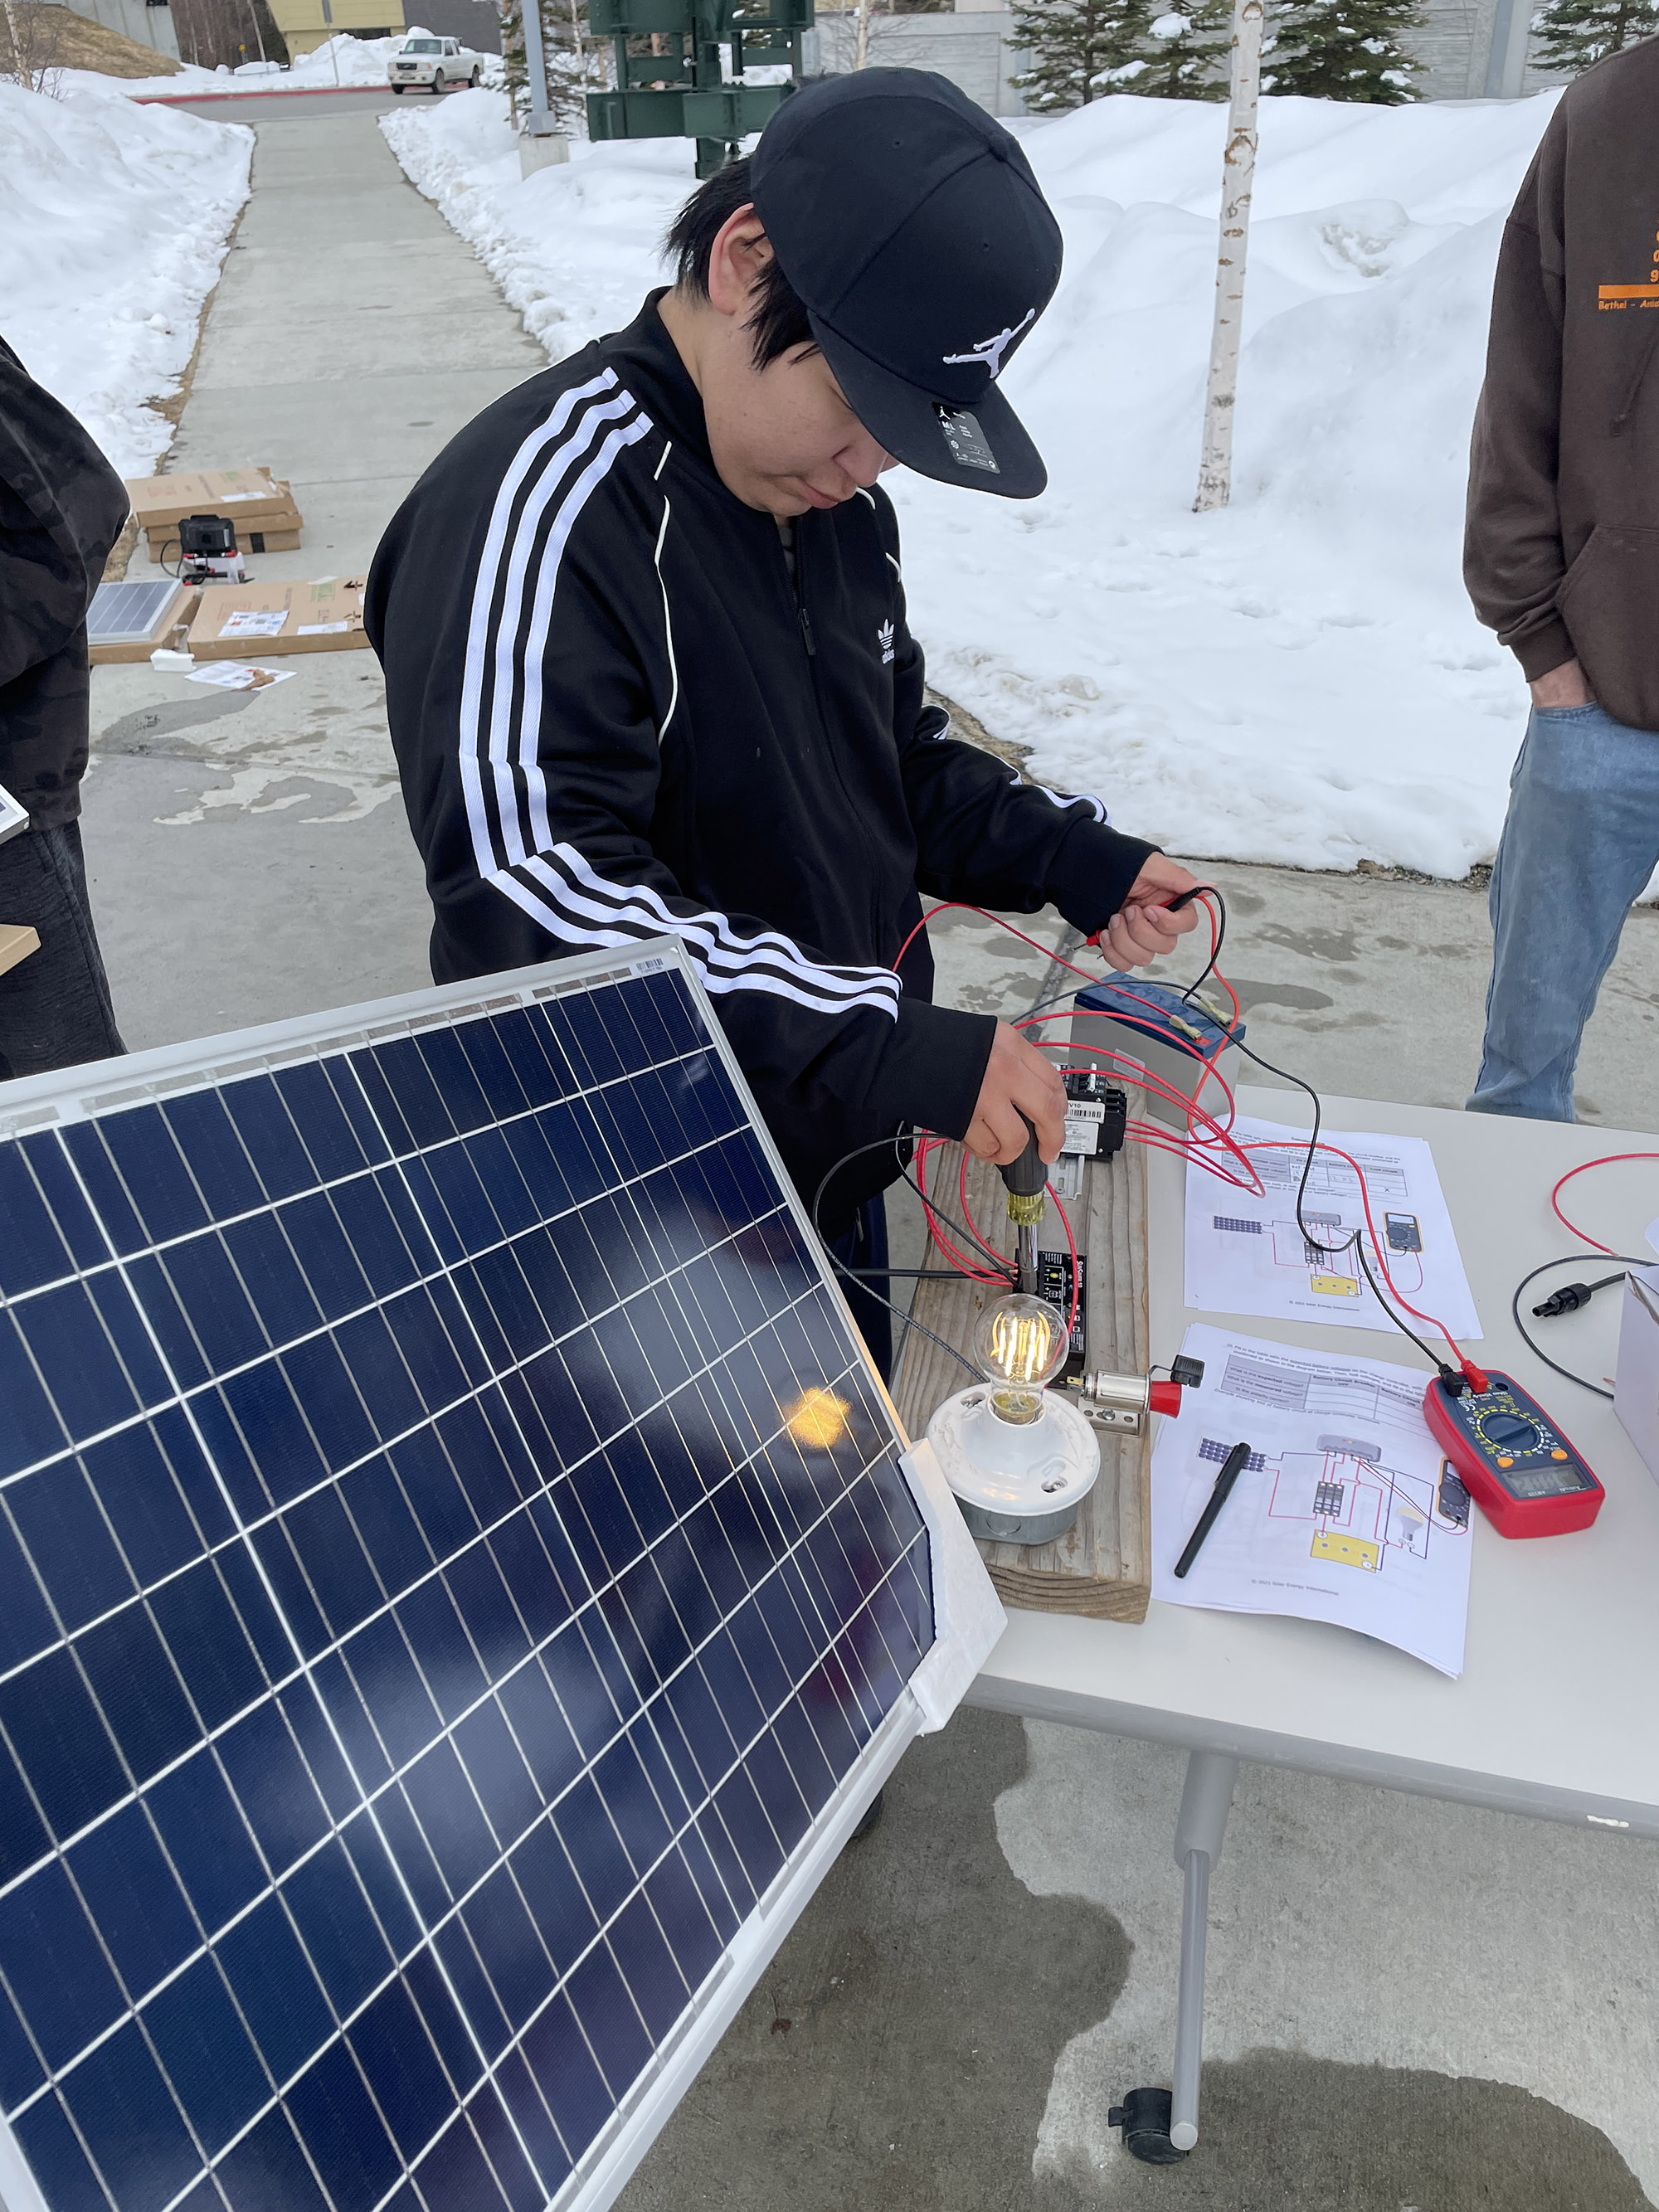 A student builds a stand-alone power system.